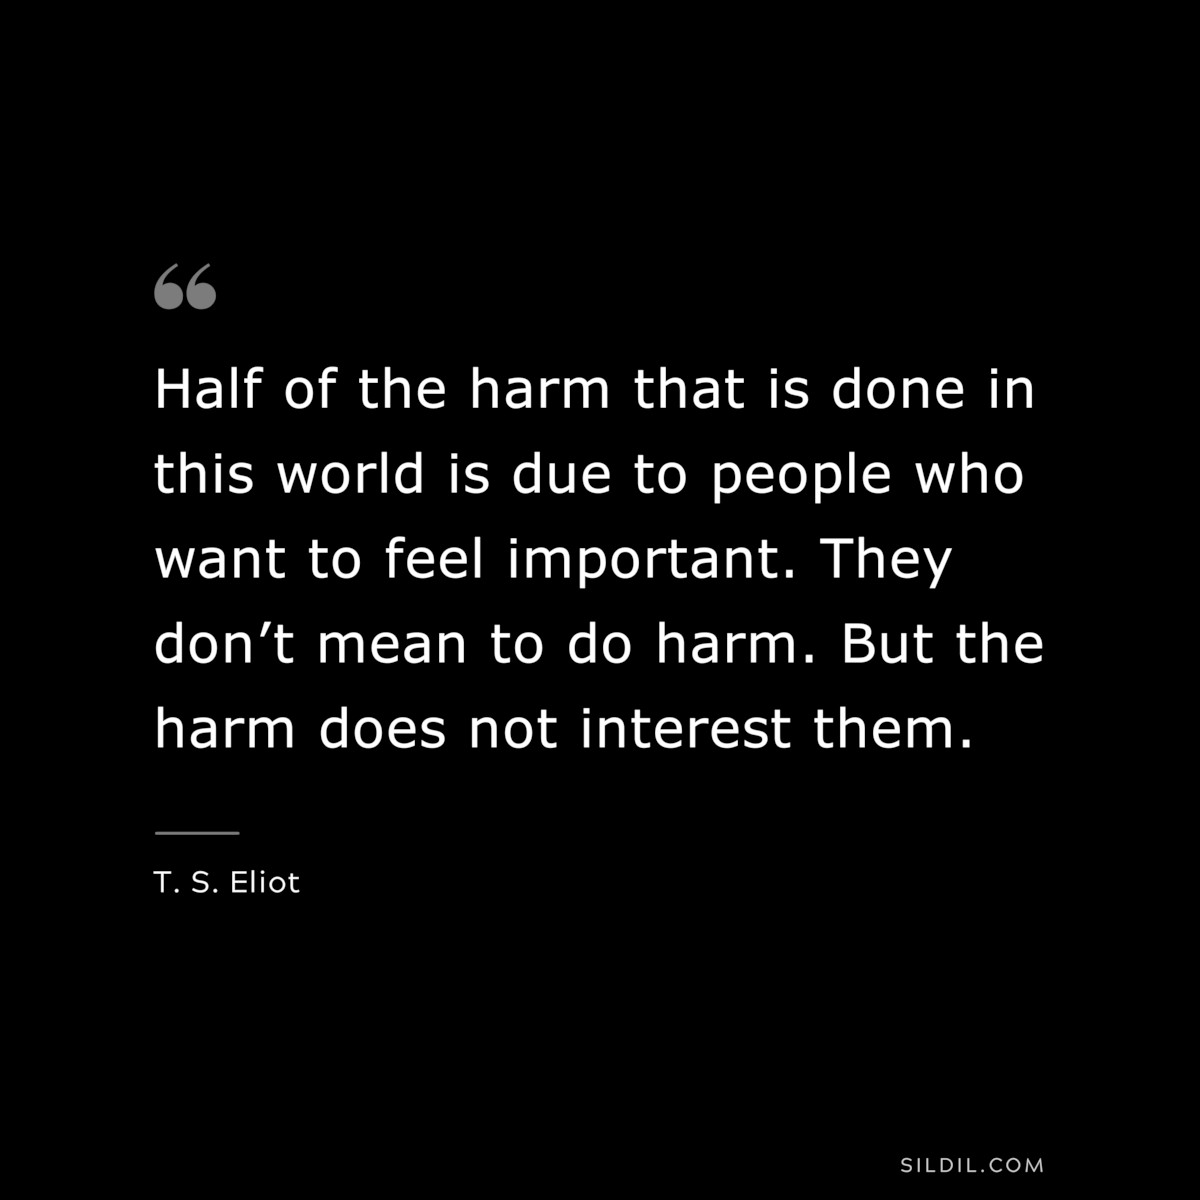 Half of the harm that is done in this world is due to people who want to feel important. They don’t mean to do harm. But the harm does not interest them. ― T. S. Eliot